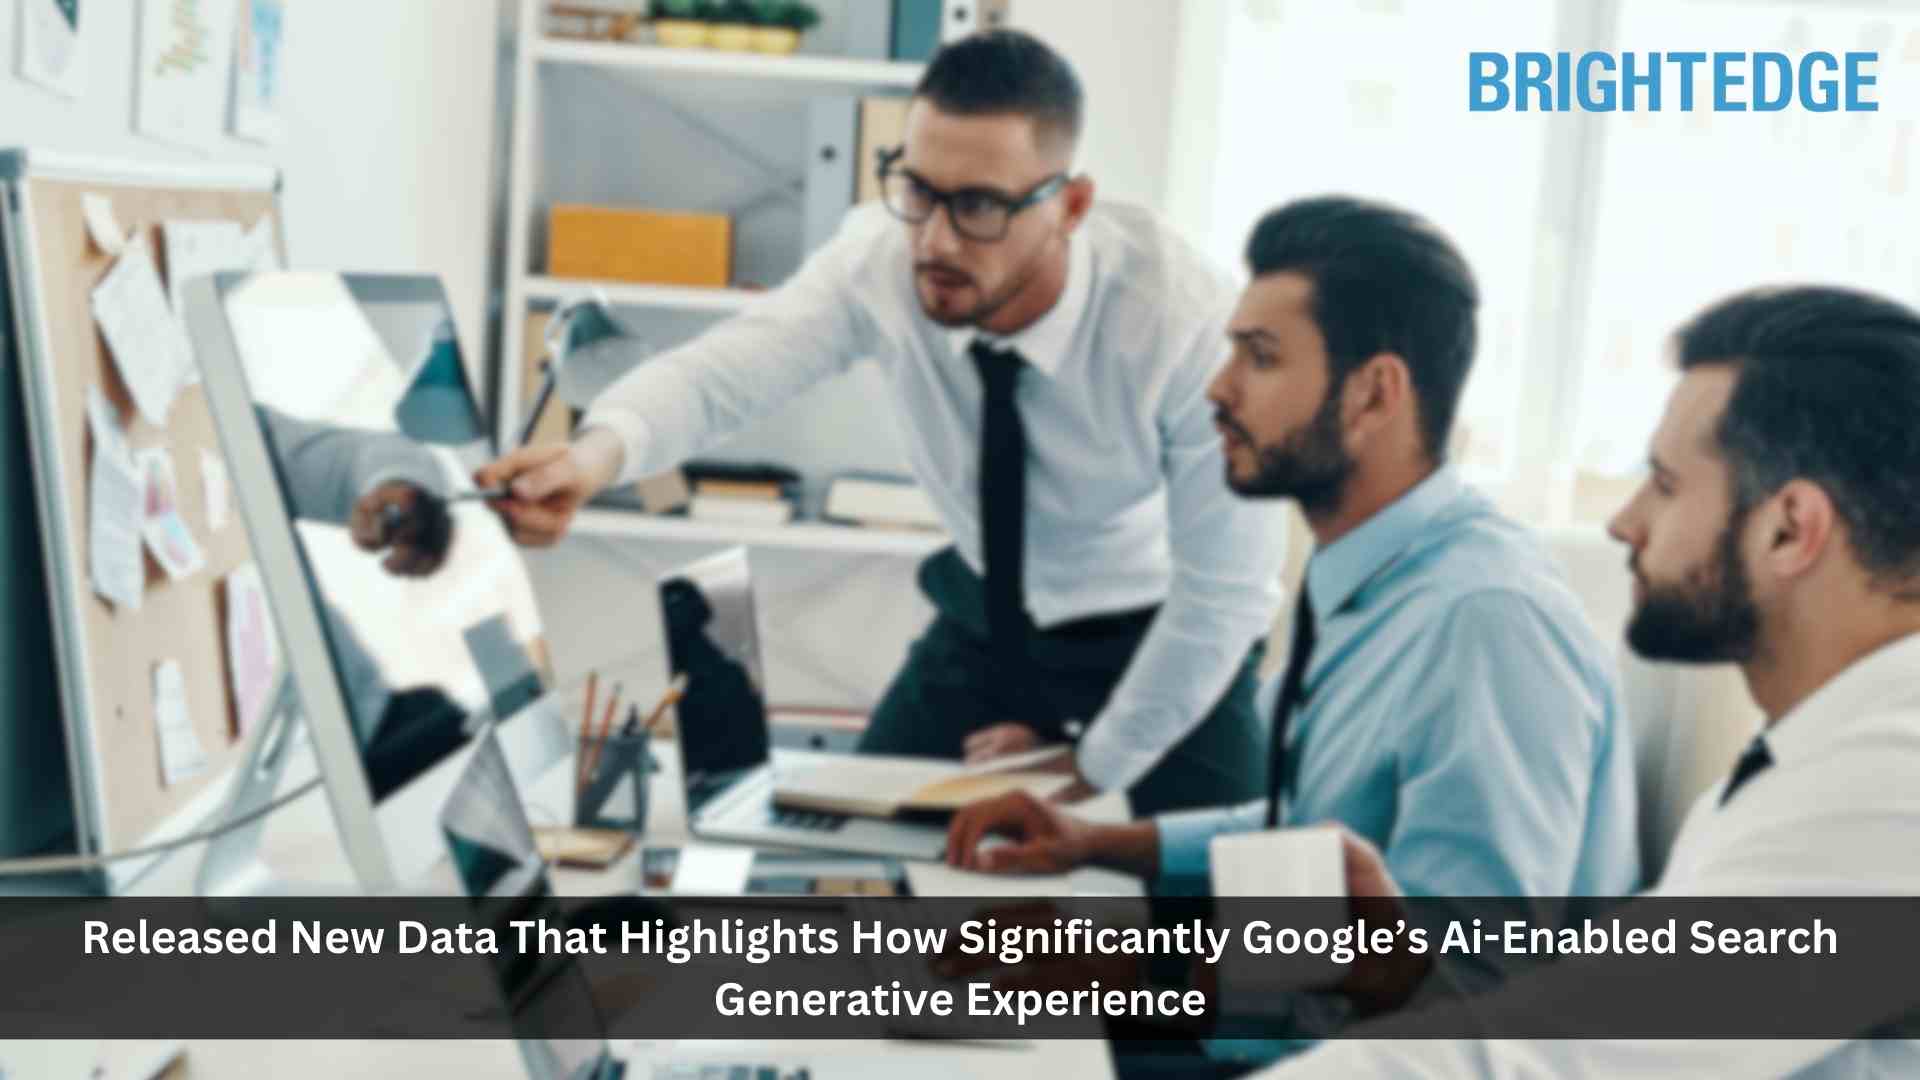 BrightEdge Releases New Data, Shows Companies How Significantly Google’s New AI-Powered Search Engine Will Impact Their Business